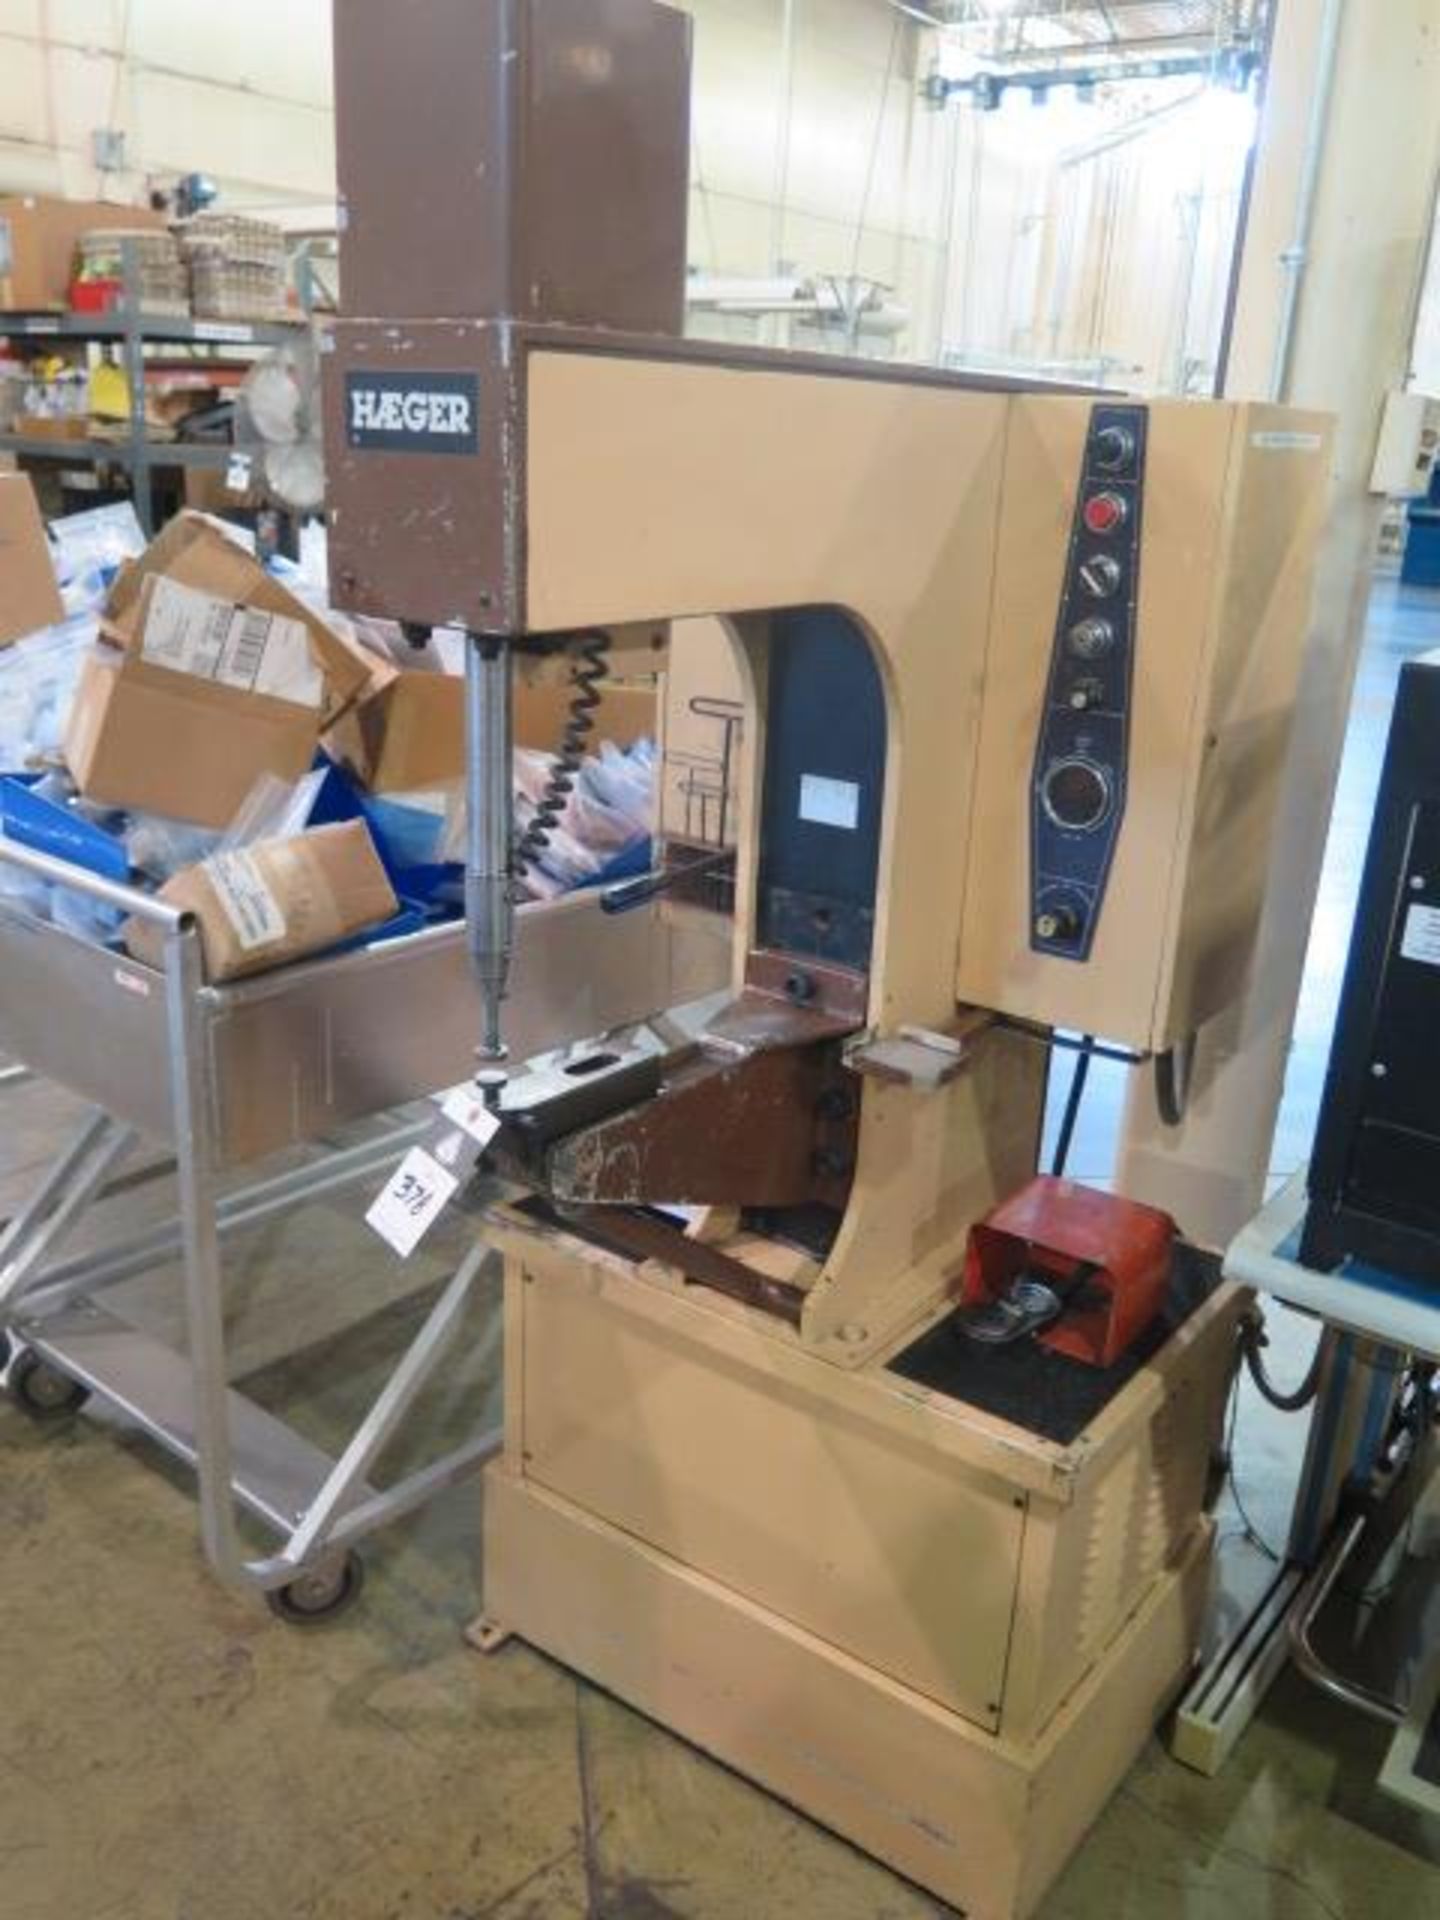 Haeger 6 Ton 18” Hardware Insertion Press w/ Foot Control (SOLD AS-IS - NO WARRANTY)